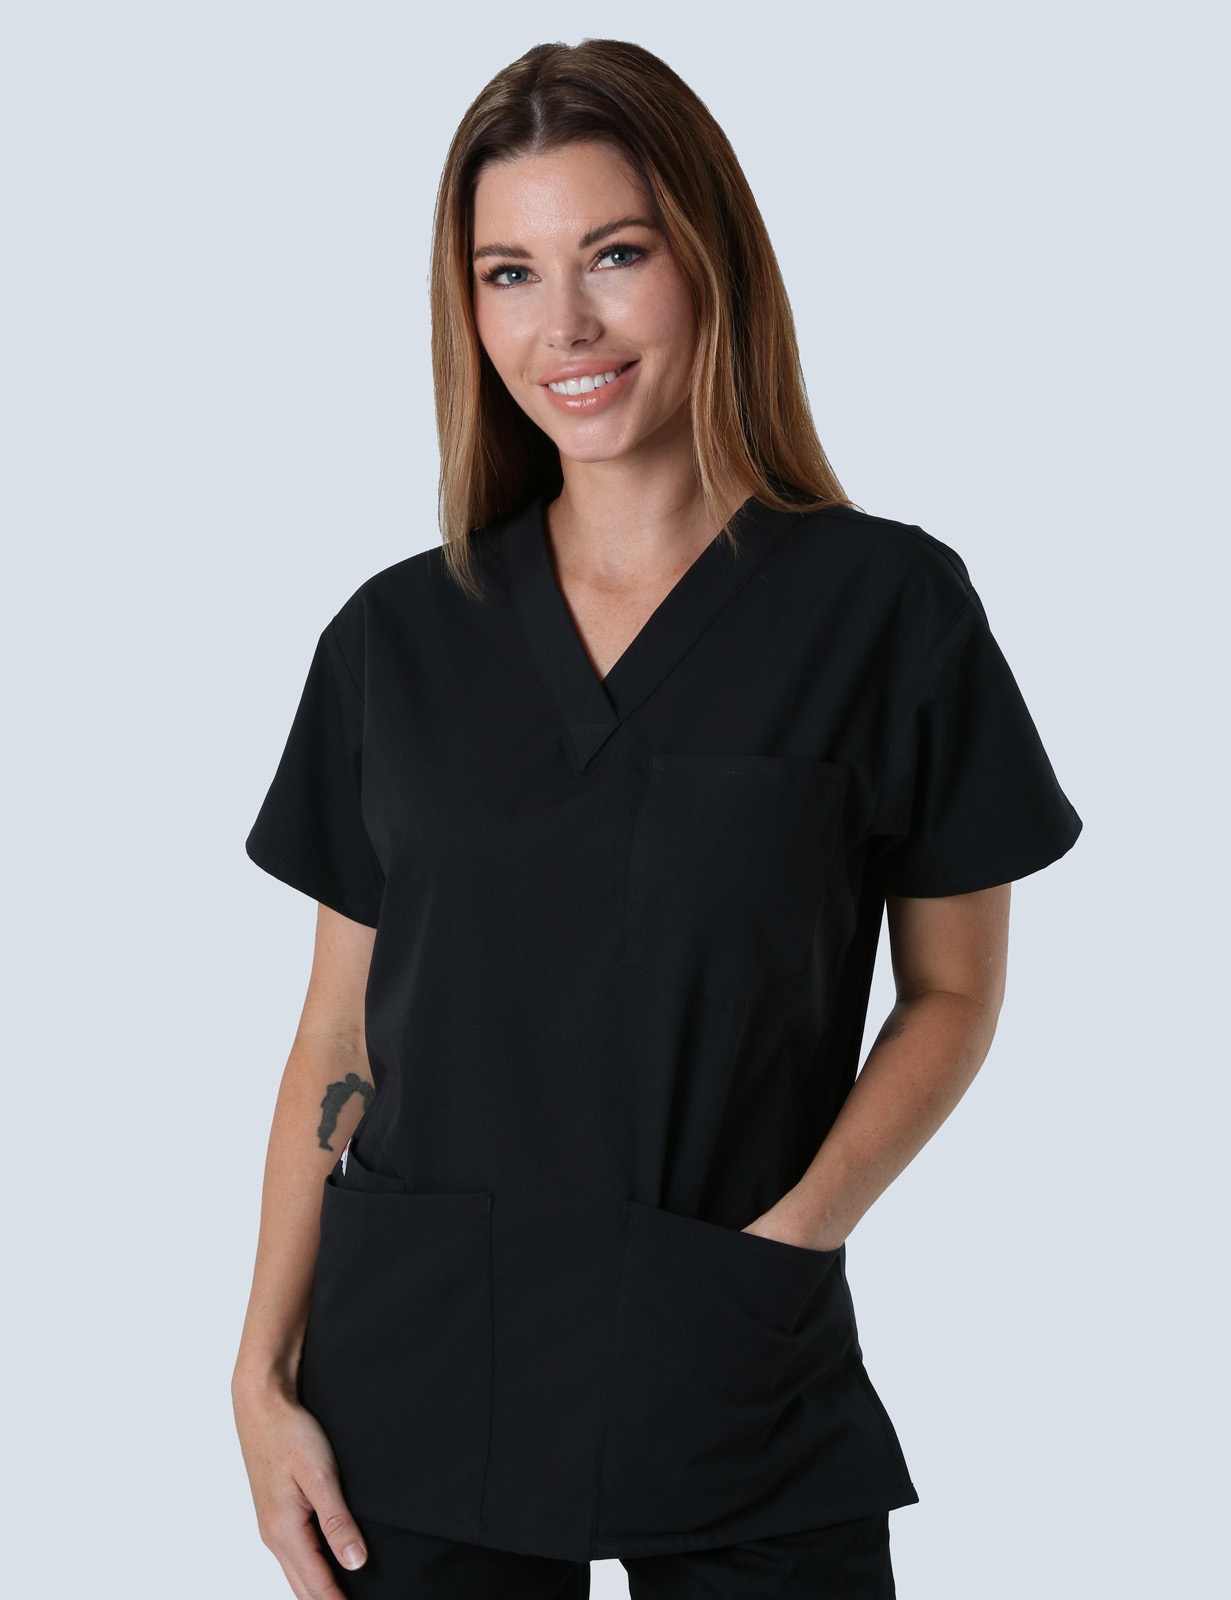 Ipswich Hospital - Emergency Physician (4 Pocket Scrub Top and Cargo Pants in Black incl Logos)